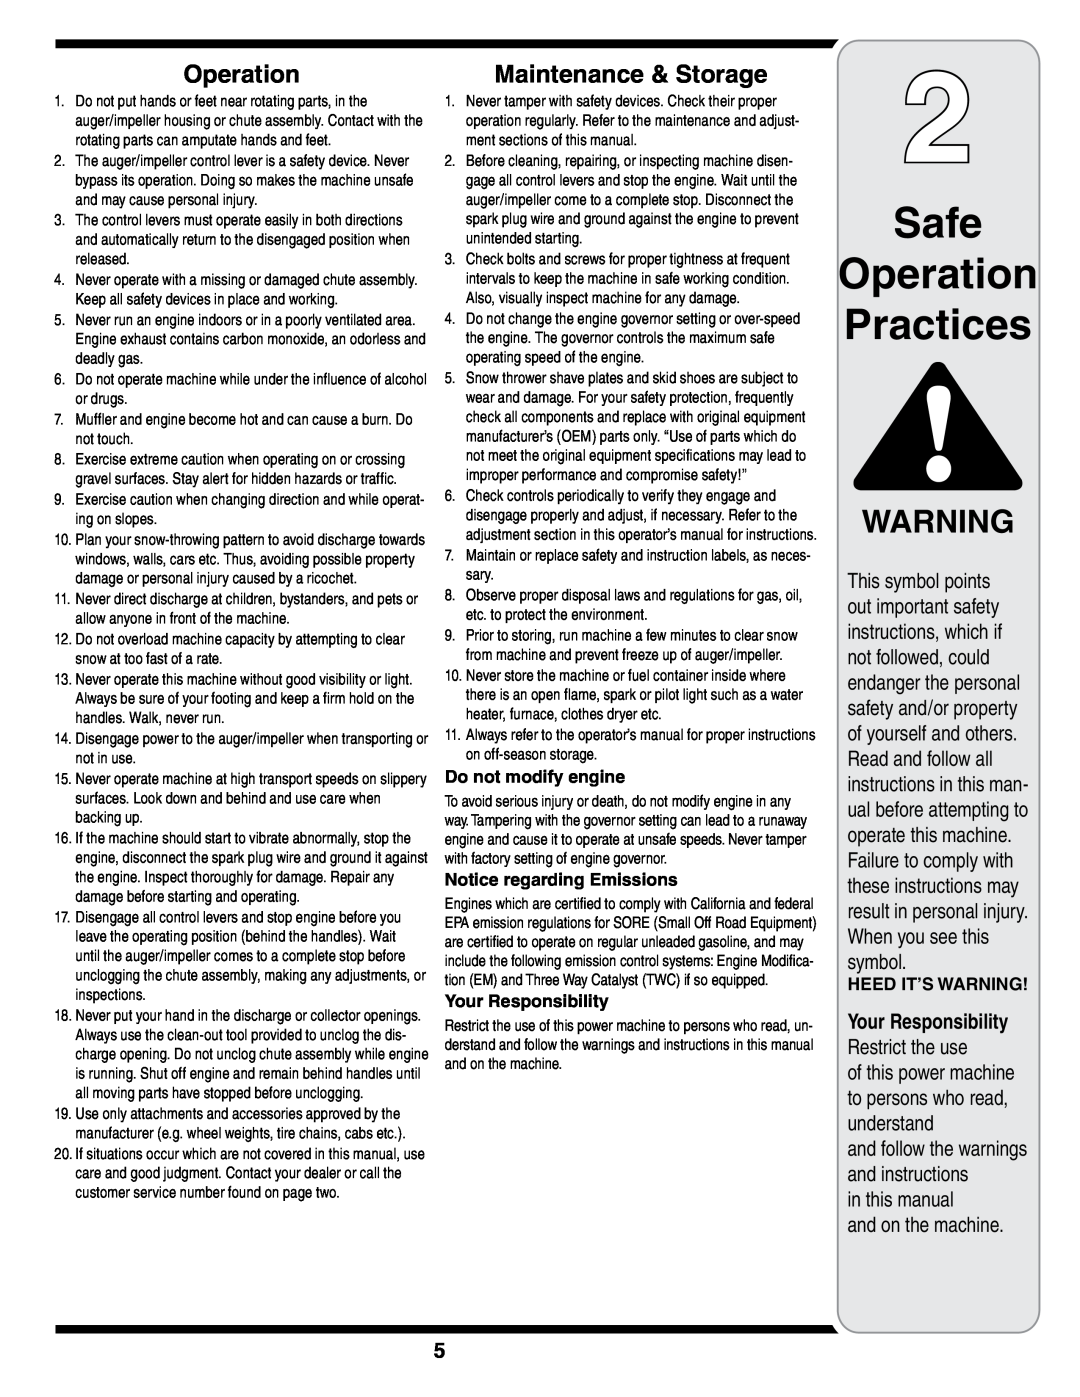 MTD 769-01275D Safe Operation Practices, Maintenance & Storage, Restrict the use, in this manual and on the machine 